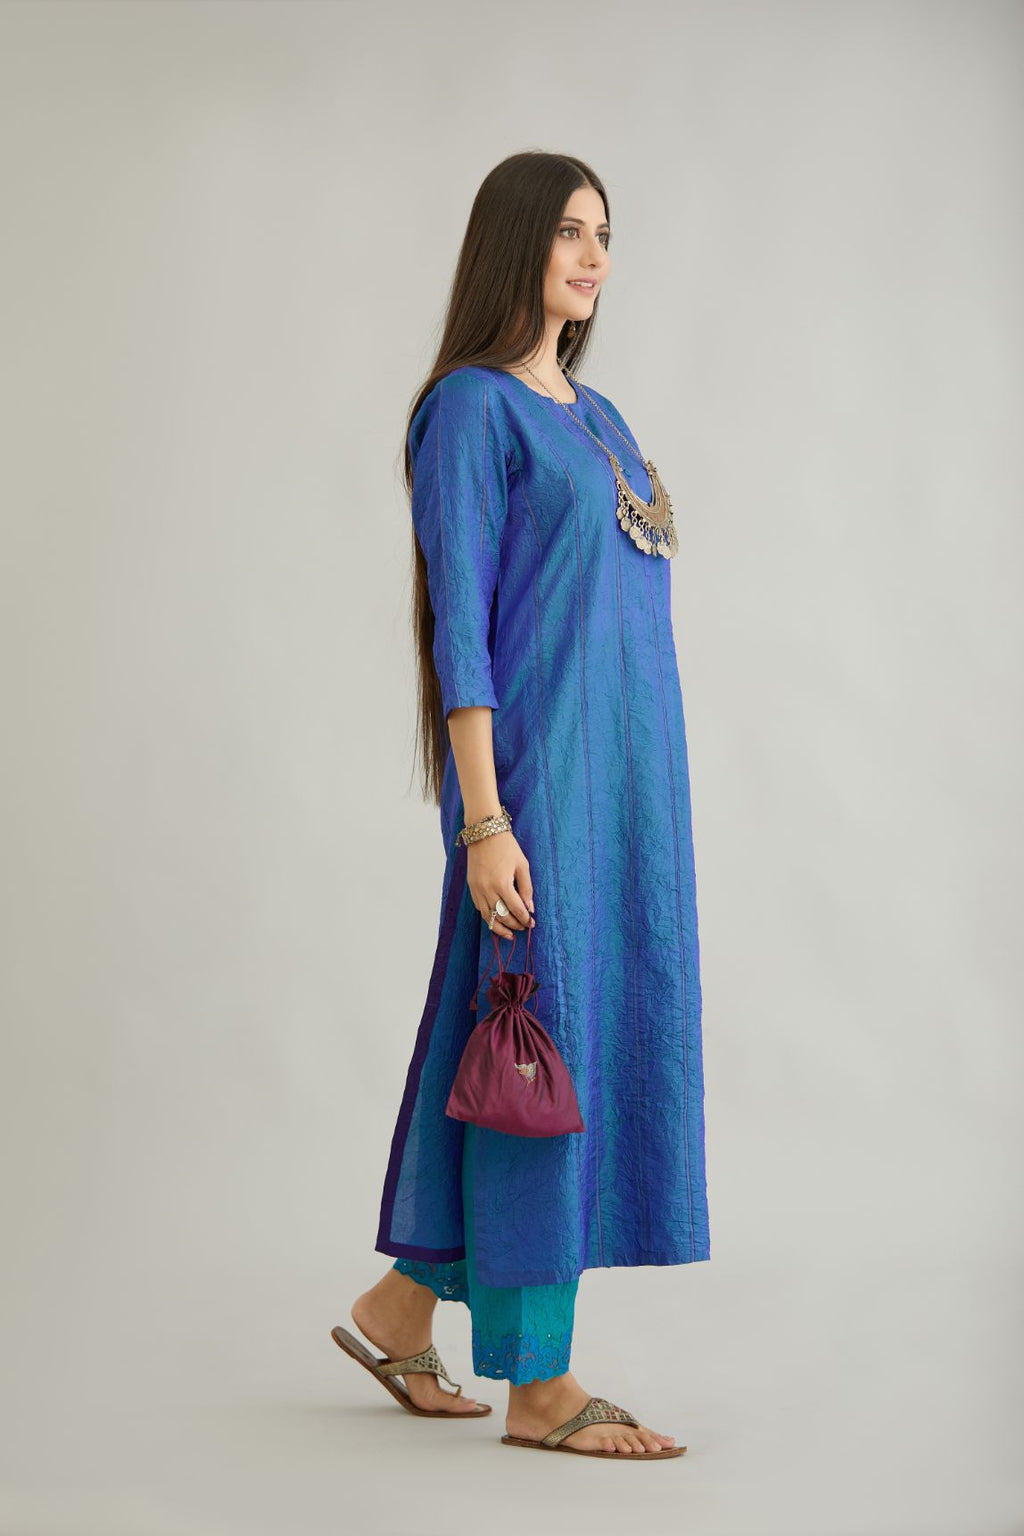 Teal blue hand crushed silk straight kurta set with vertical organza fabric inset stripe detail in front, back and 3/4 sleeves, highlighted with contrasting top stitch.